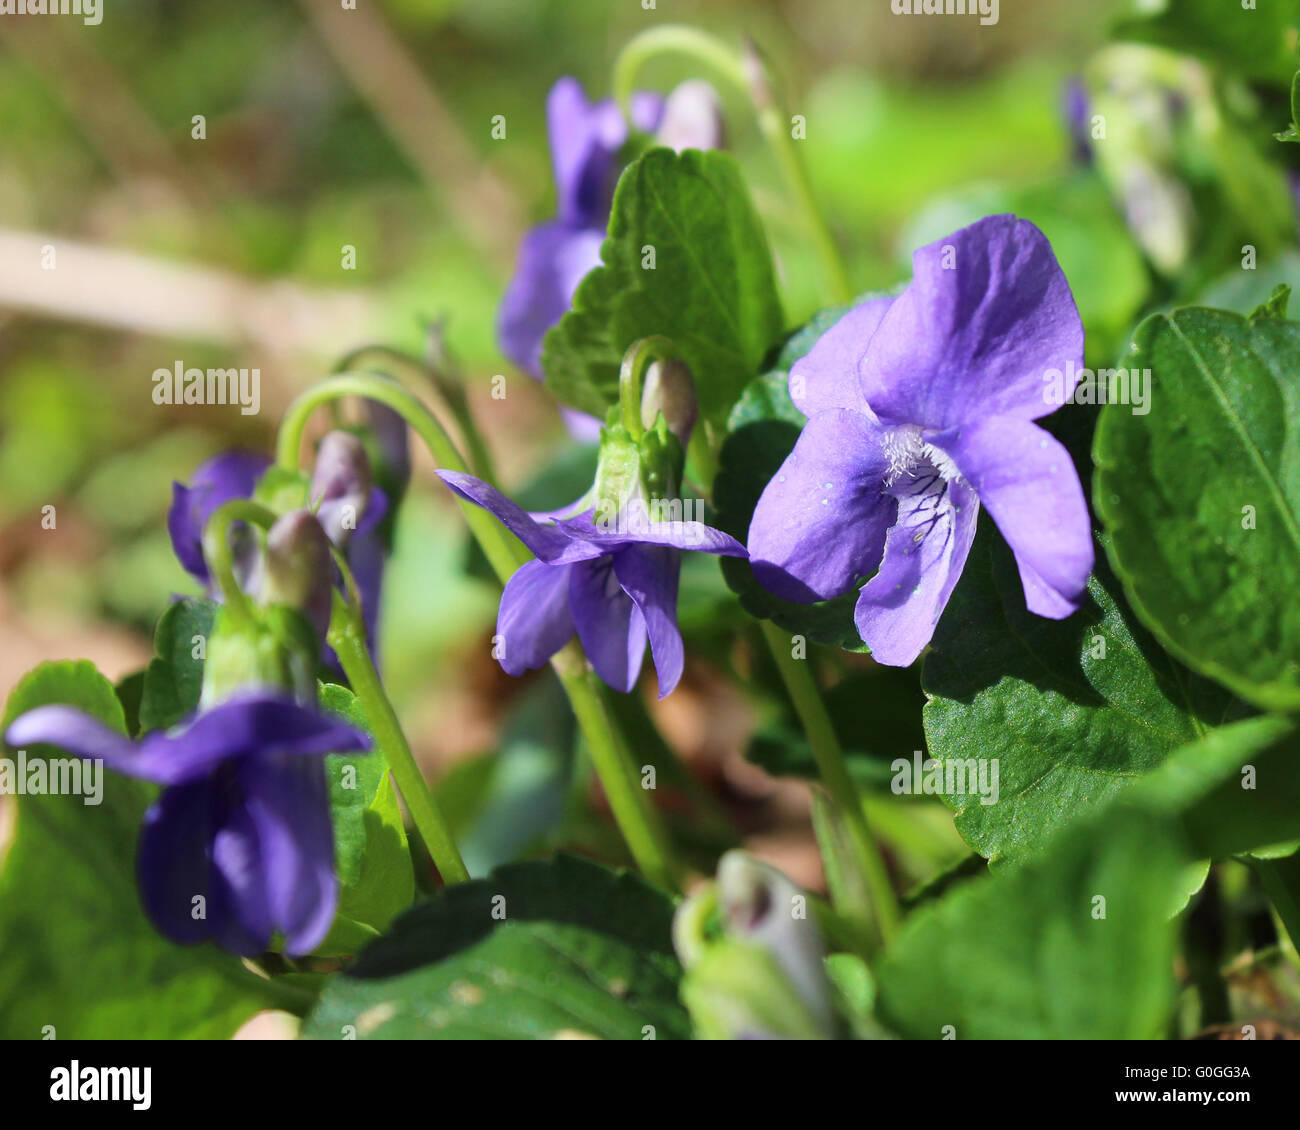 The lovely flowers of Viola sororia, also known as the common blue violet, or wood violet, growing in a natural setting. Stock Photo